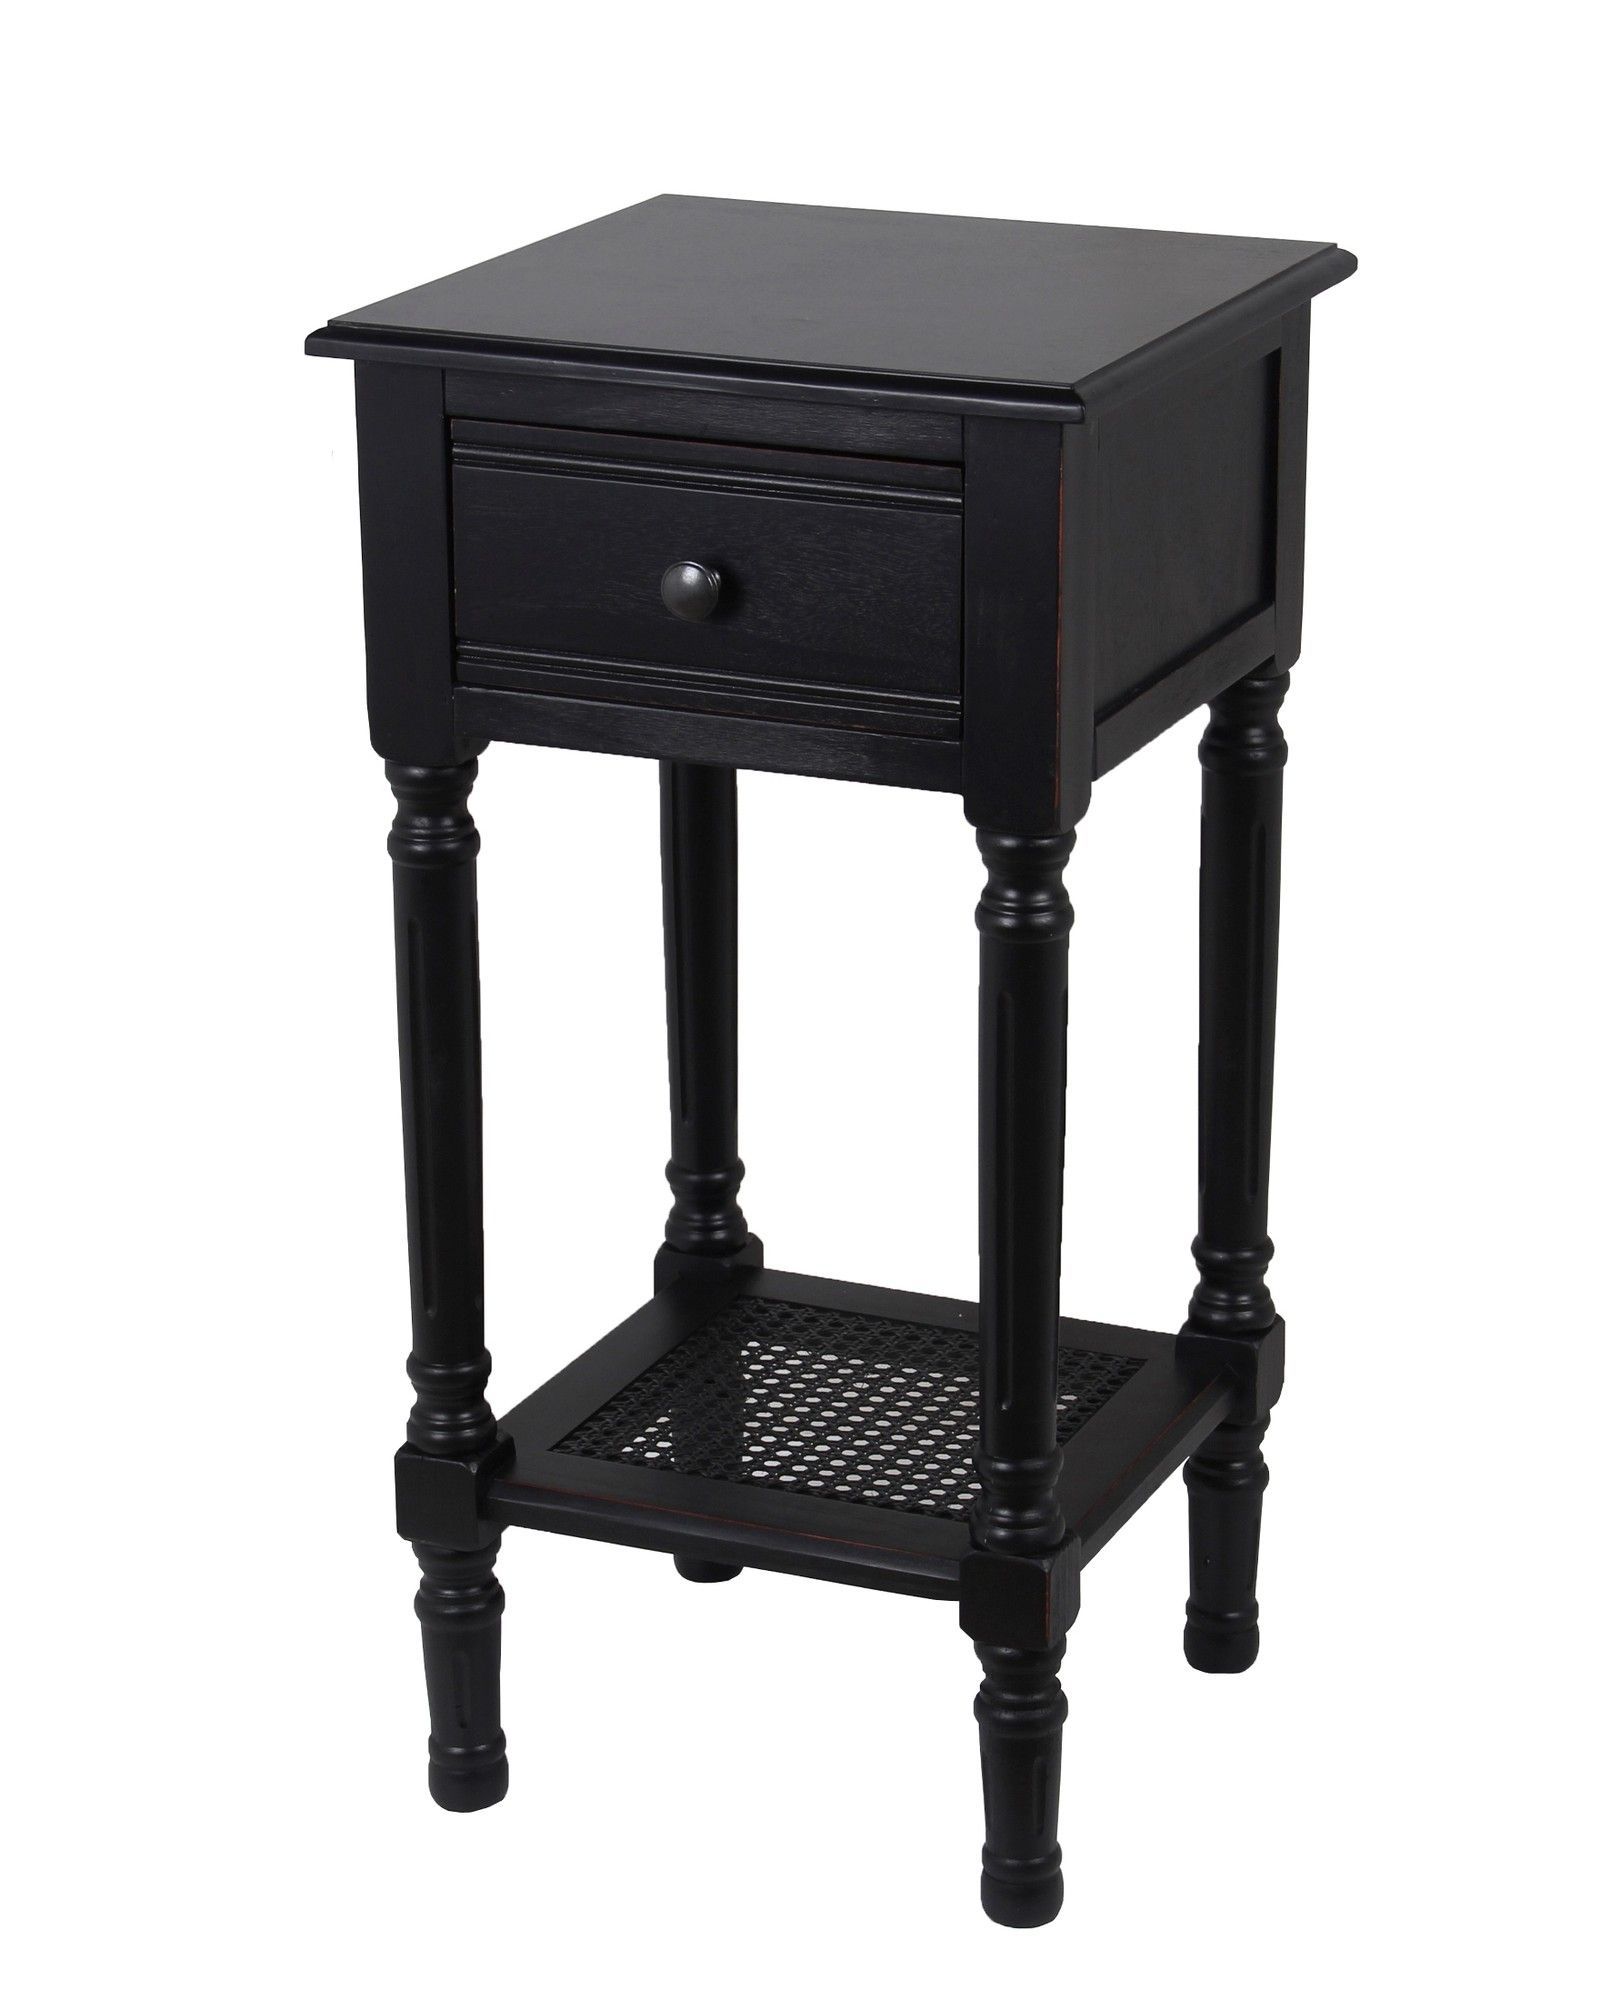 buckmaster drawer end table products black side accent with storage wooden shelves wood counter height dining red oriental lamps farm door modern stools beautiful antique ese grey